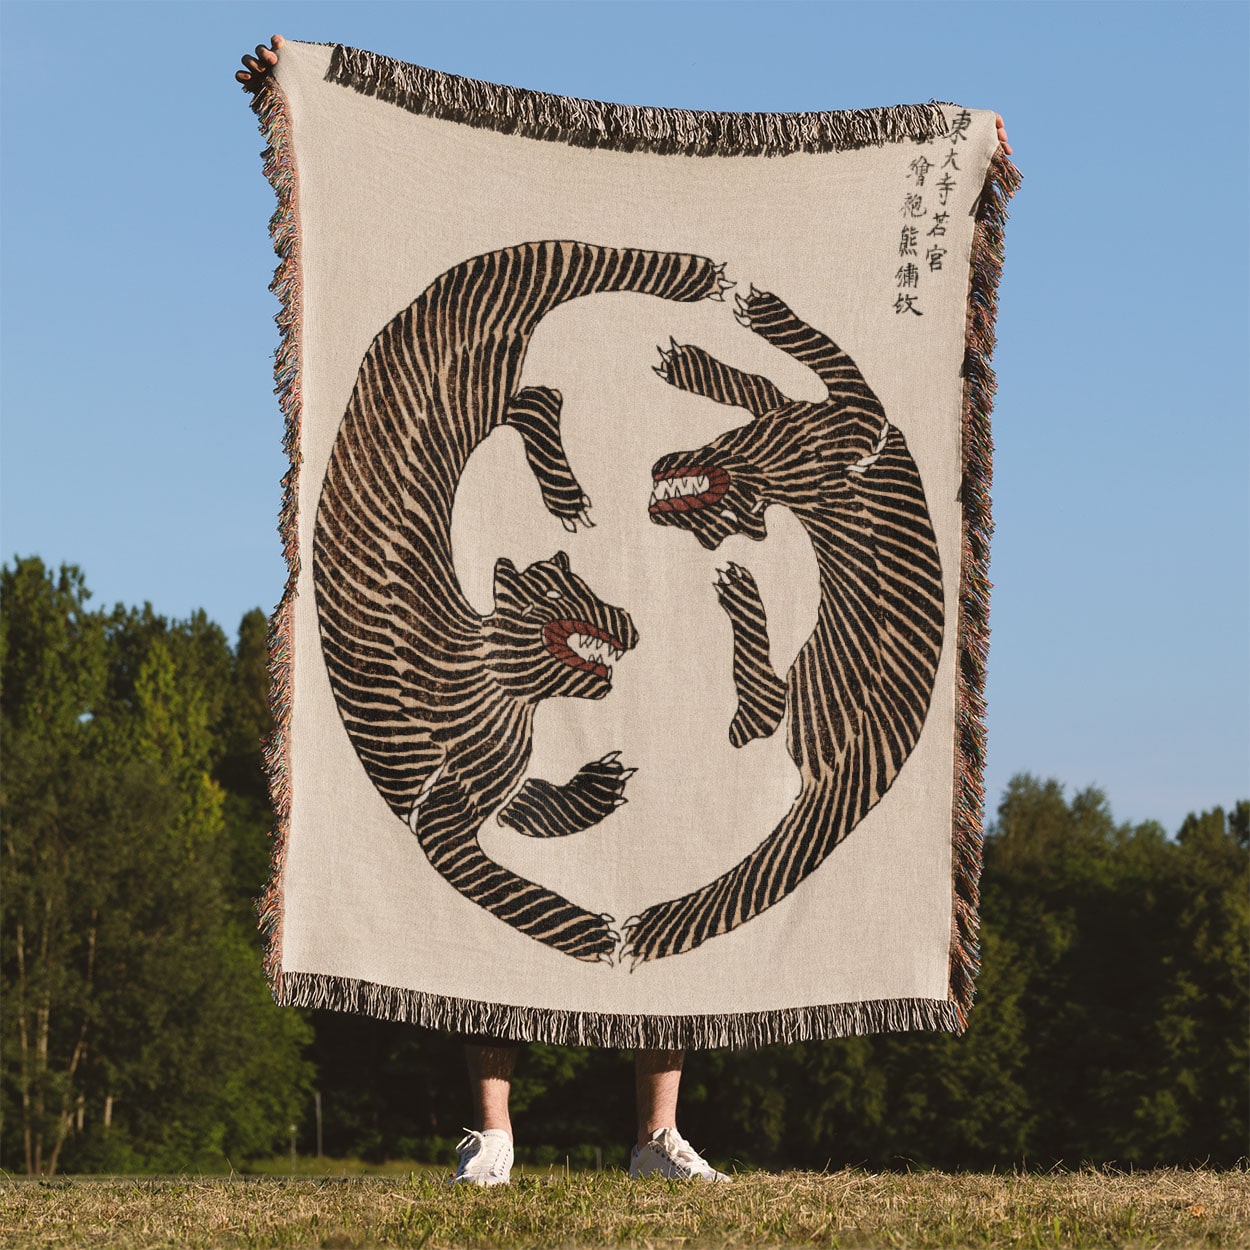 Cool Tiger Woven Blanket Held Up Outside